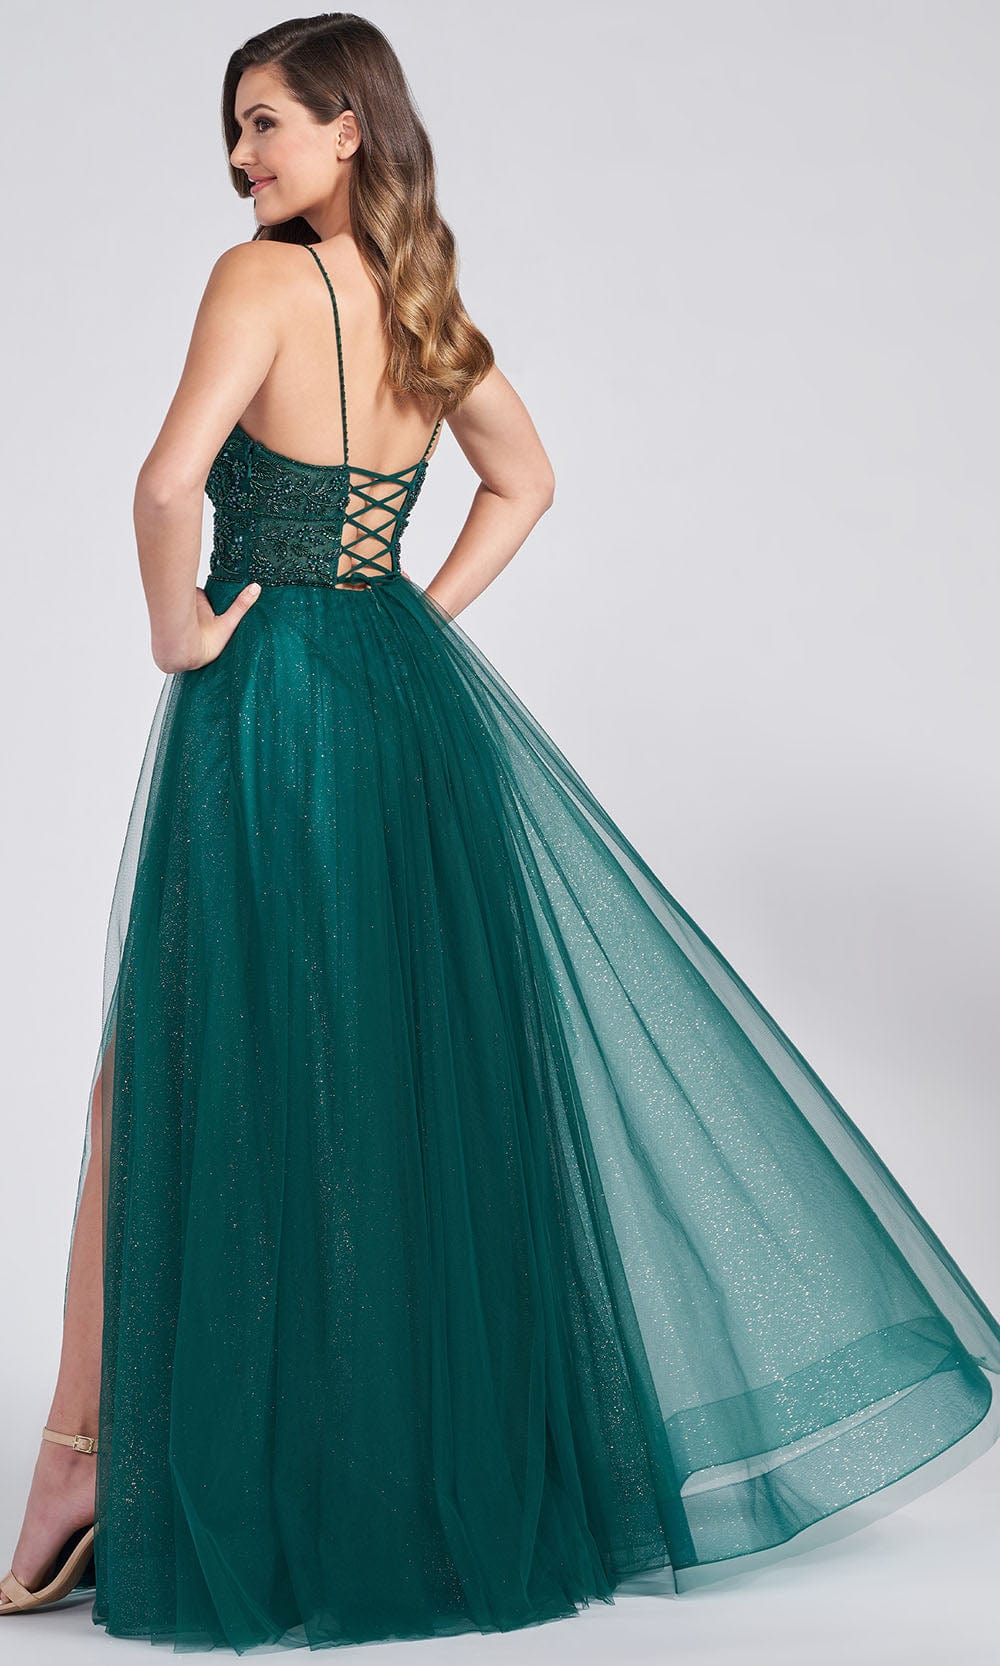 Ellie Wilde EW122066 - Lace Up Back Adorned Bodice A Line Gown Prom Dresses